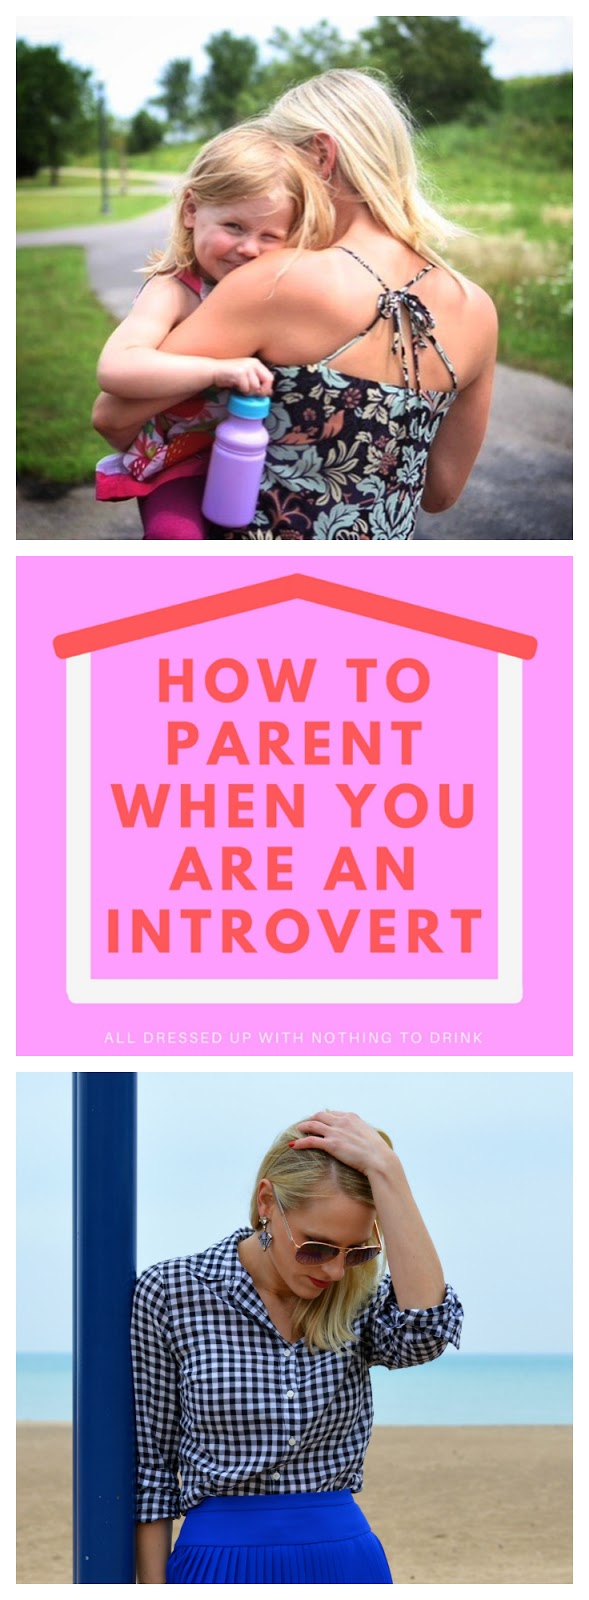 How to Parent When You Are An Introvert